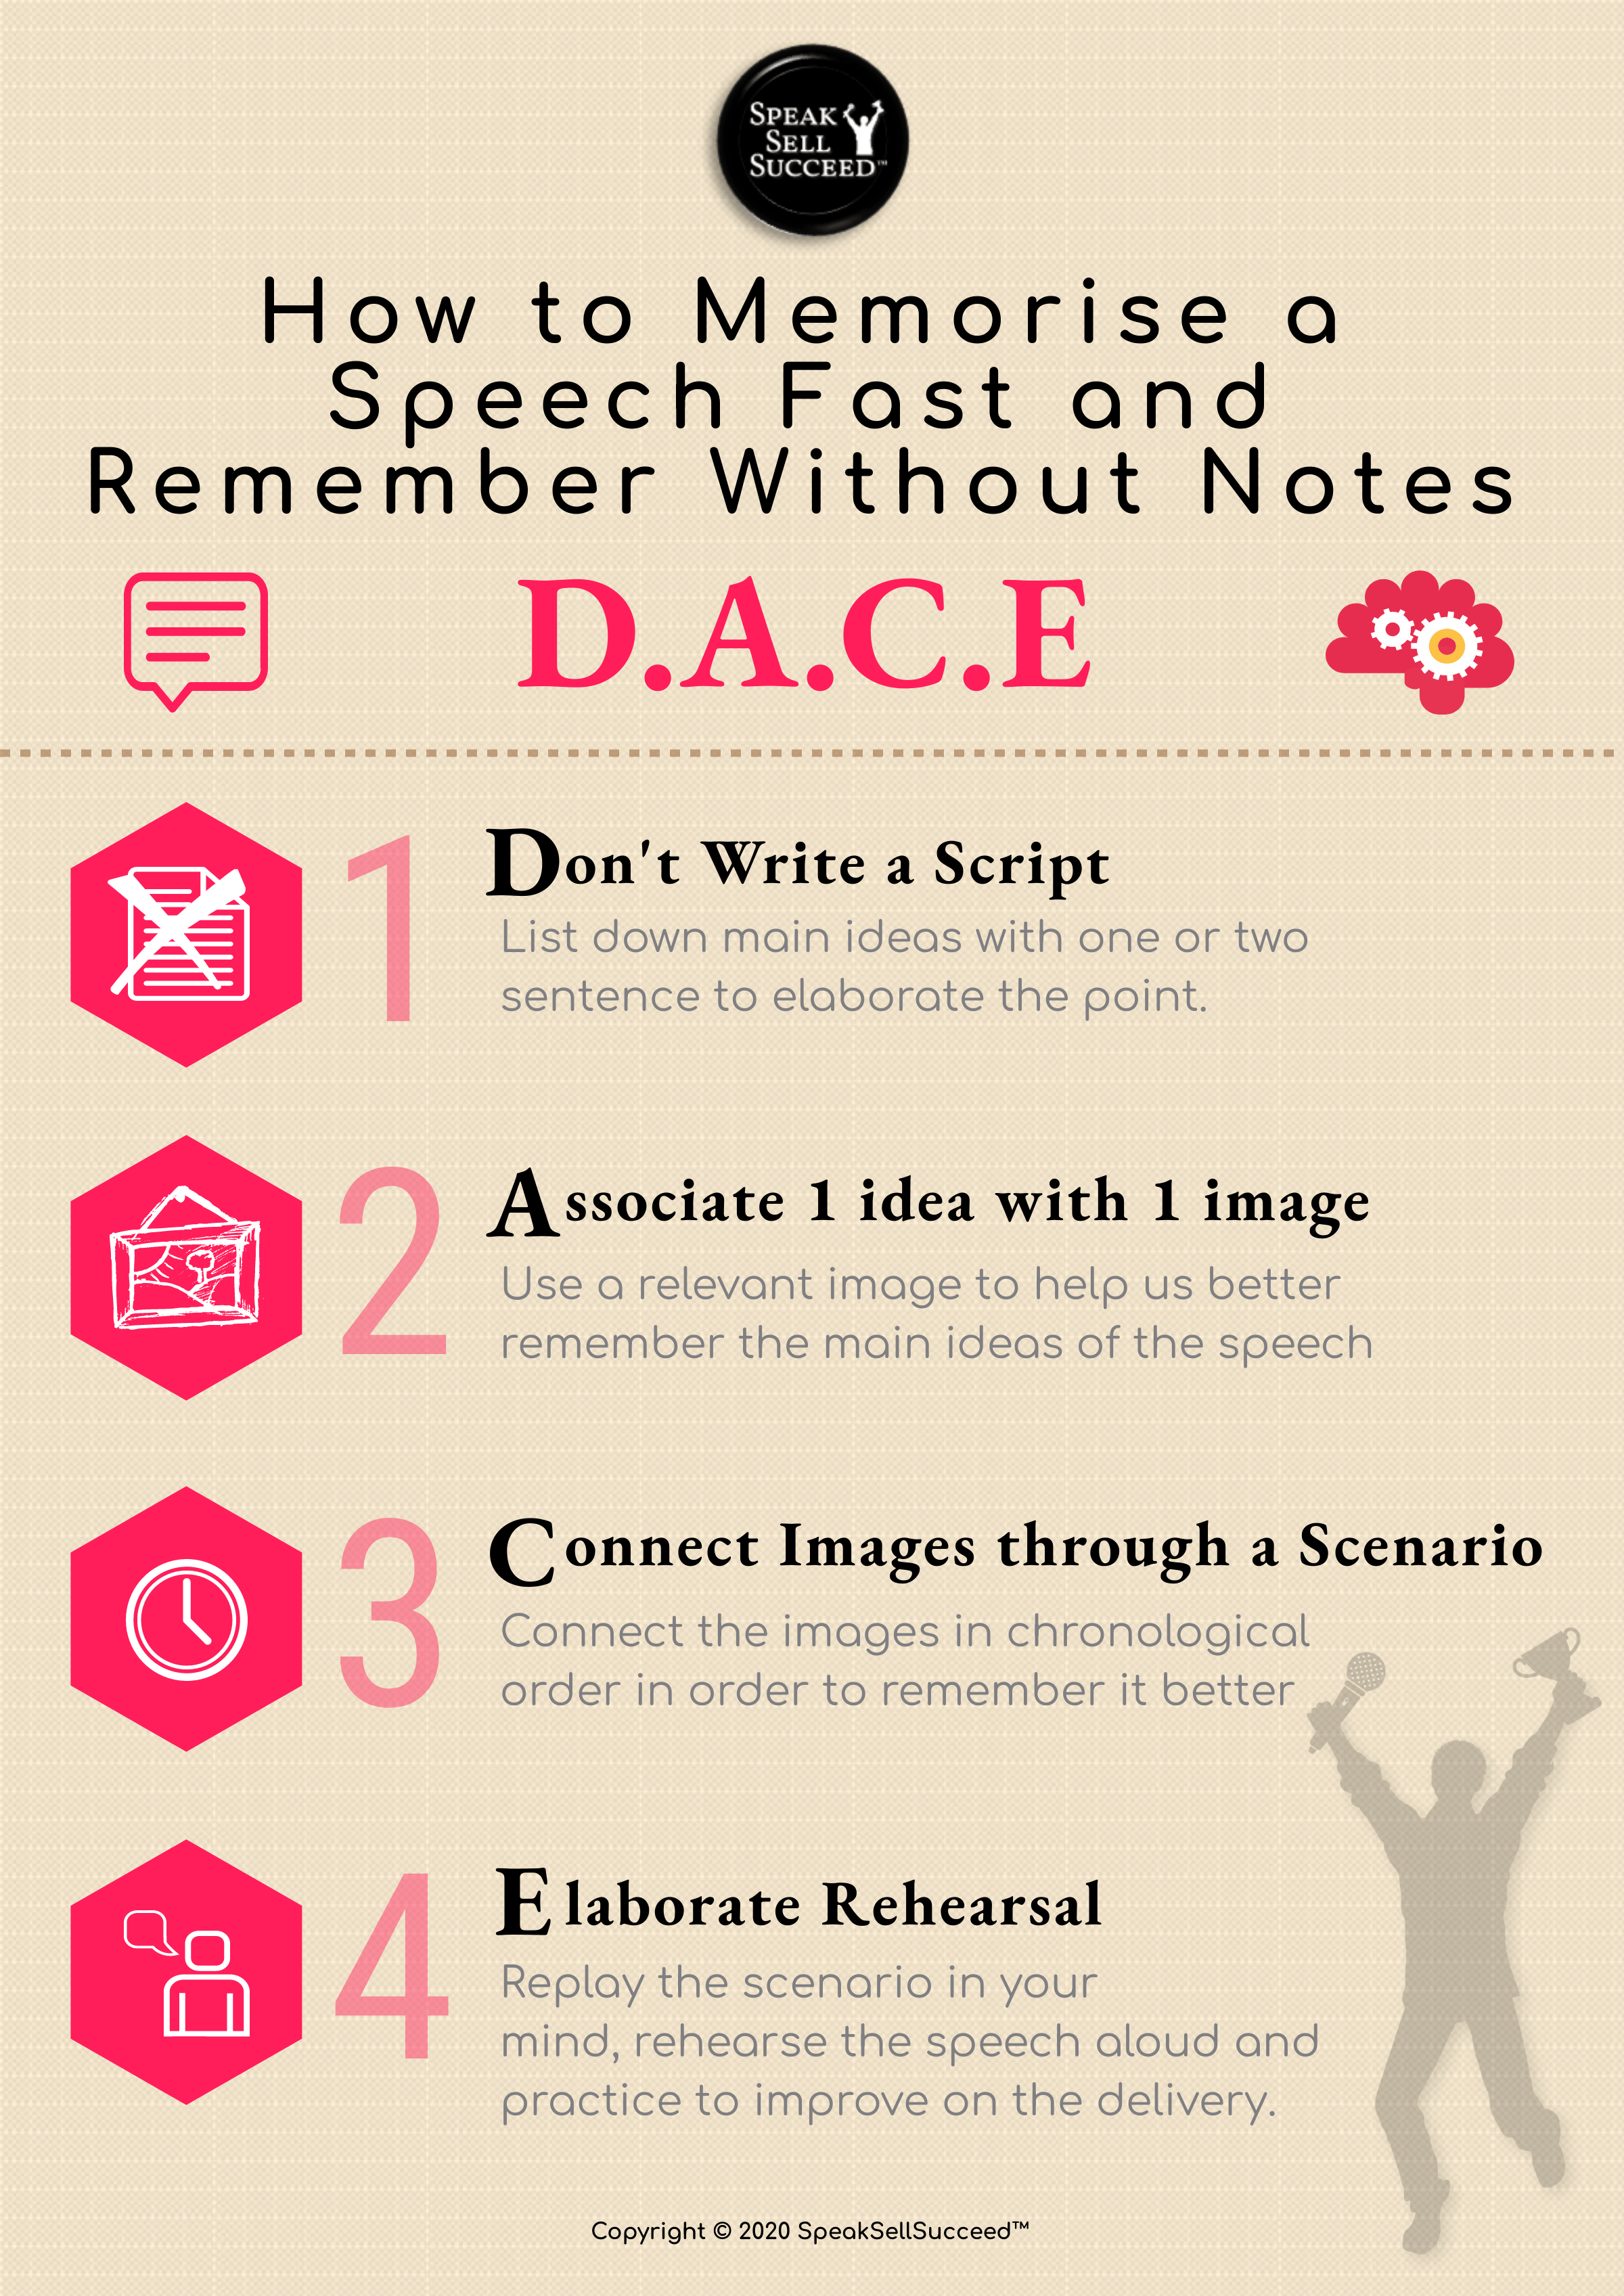 How to Memorise a Speech Fast and Remember Without Notes